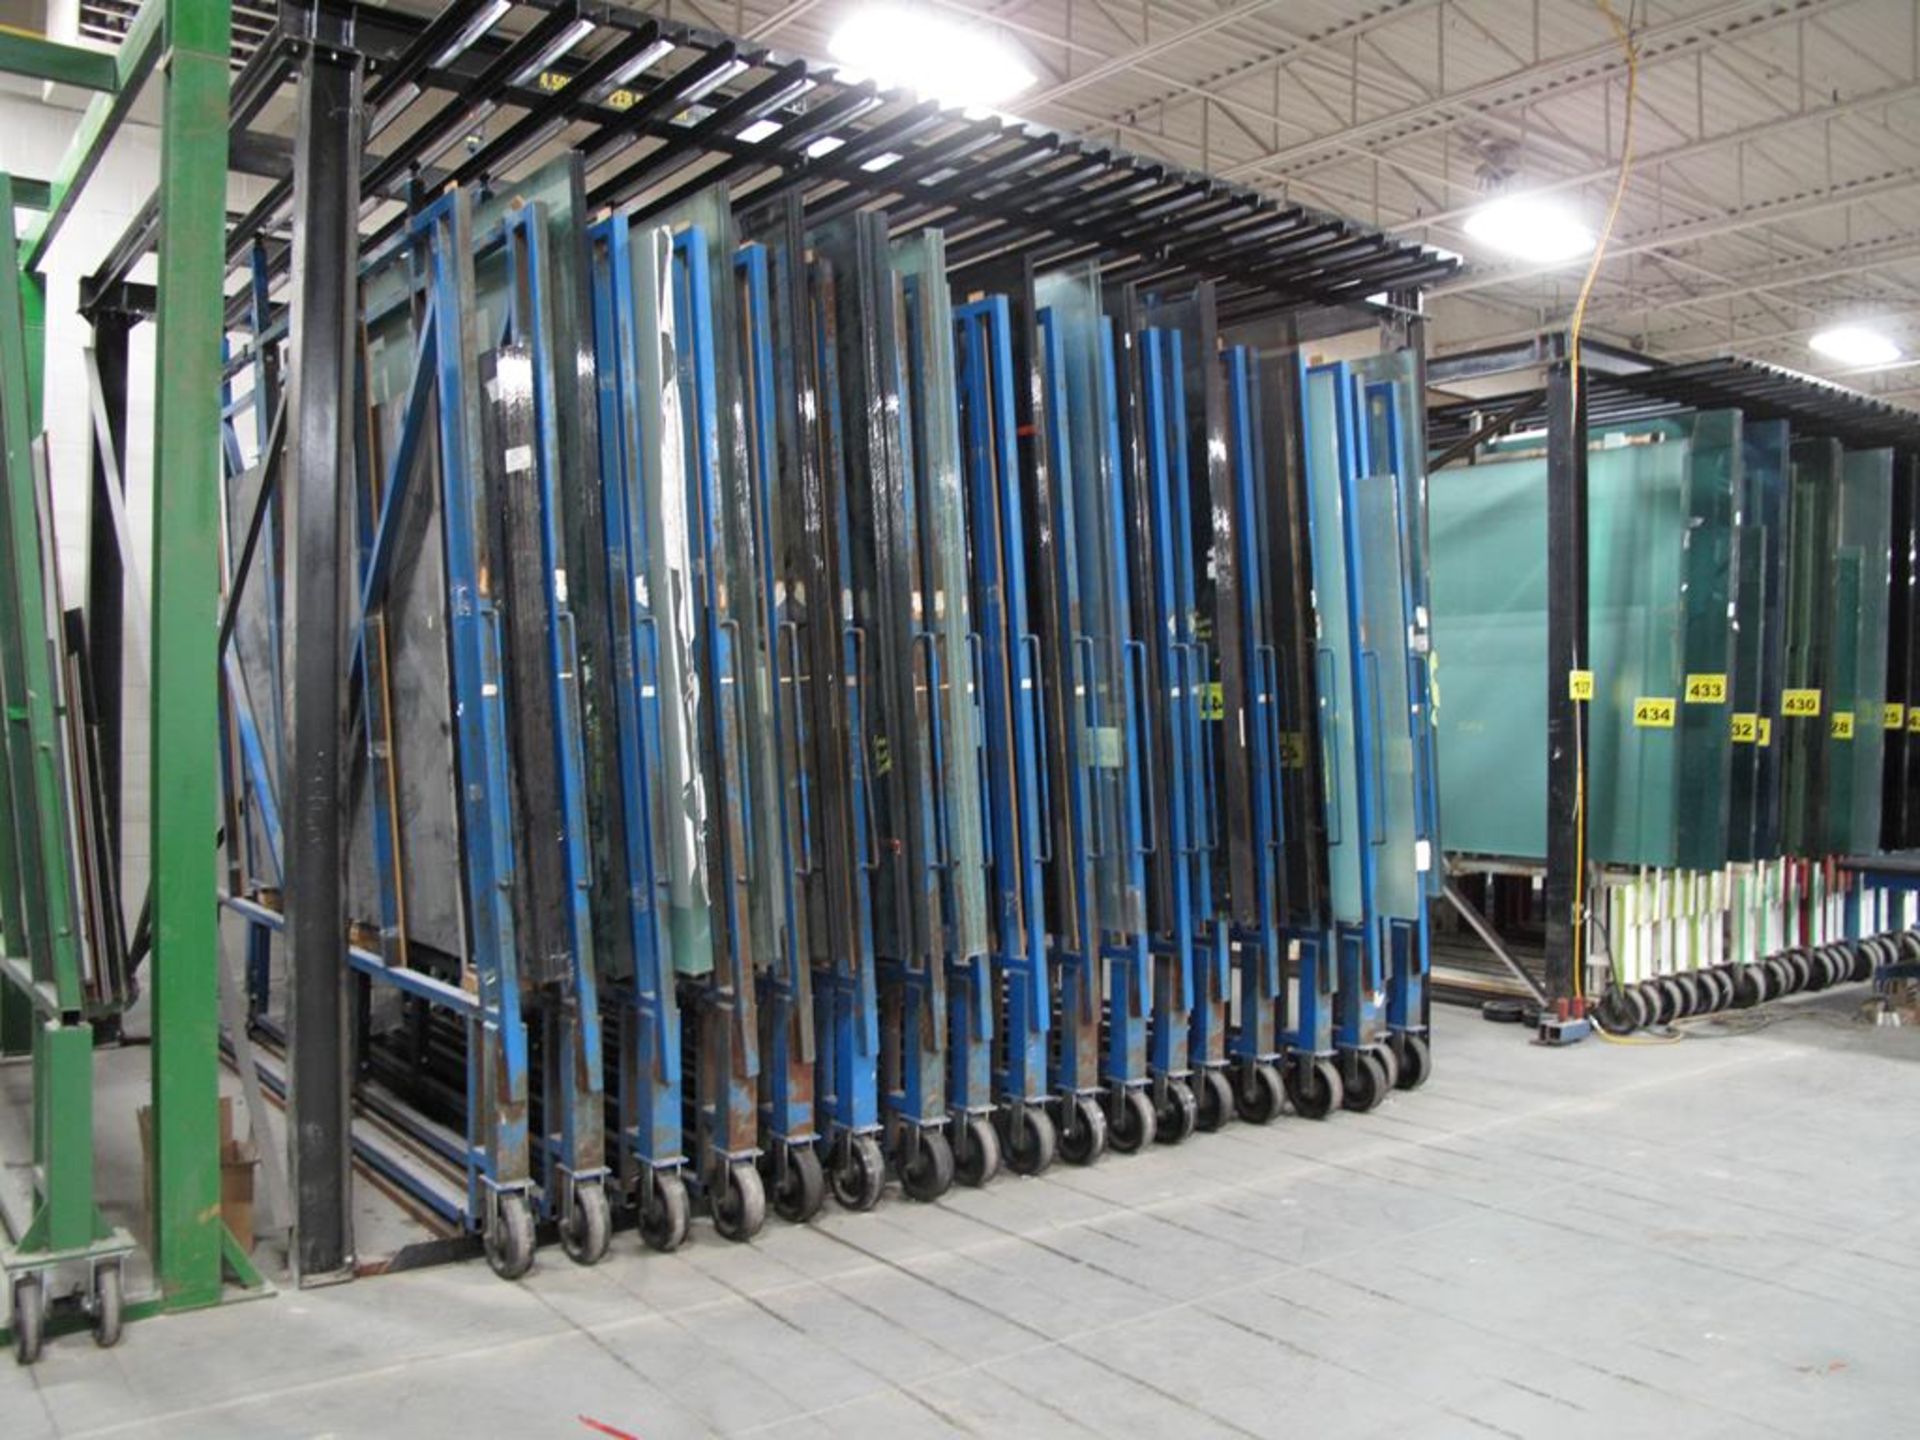 BROMER, 18 DRAWER, GLASS STORAGE SYSTEM, MAX GLASS SIZE 96" T X 140" LONG, MAX CAPACITY 4500 LBS. - Image 3 of 5